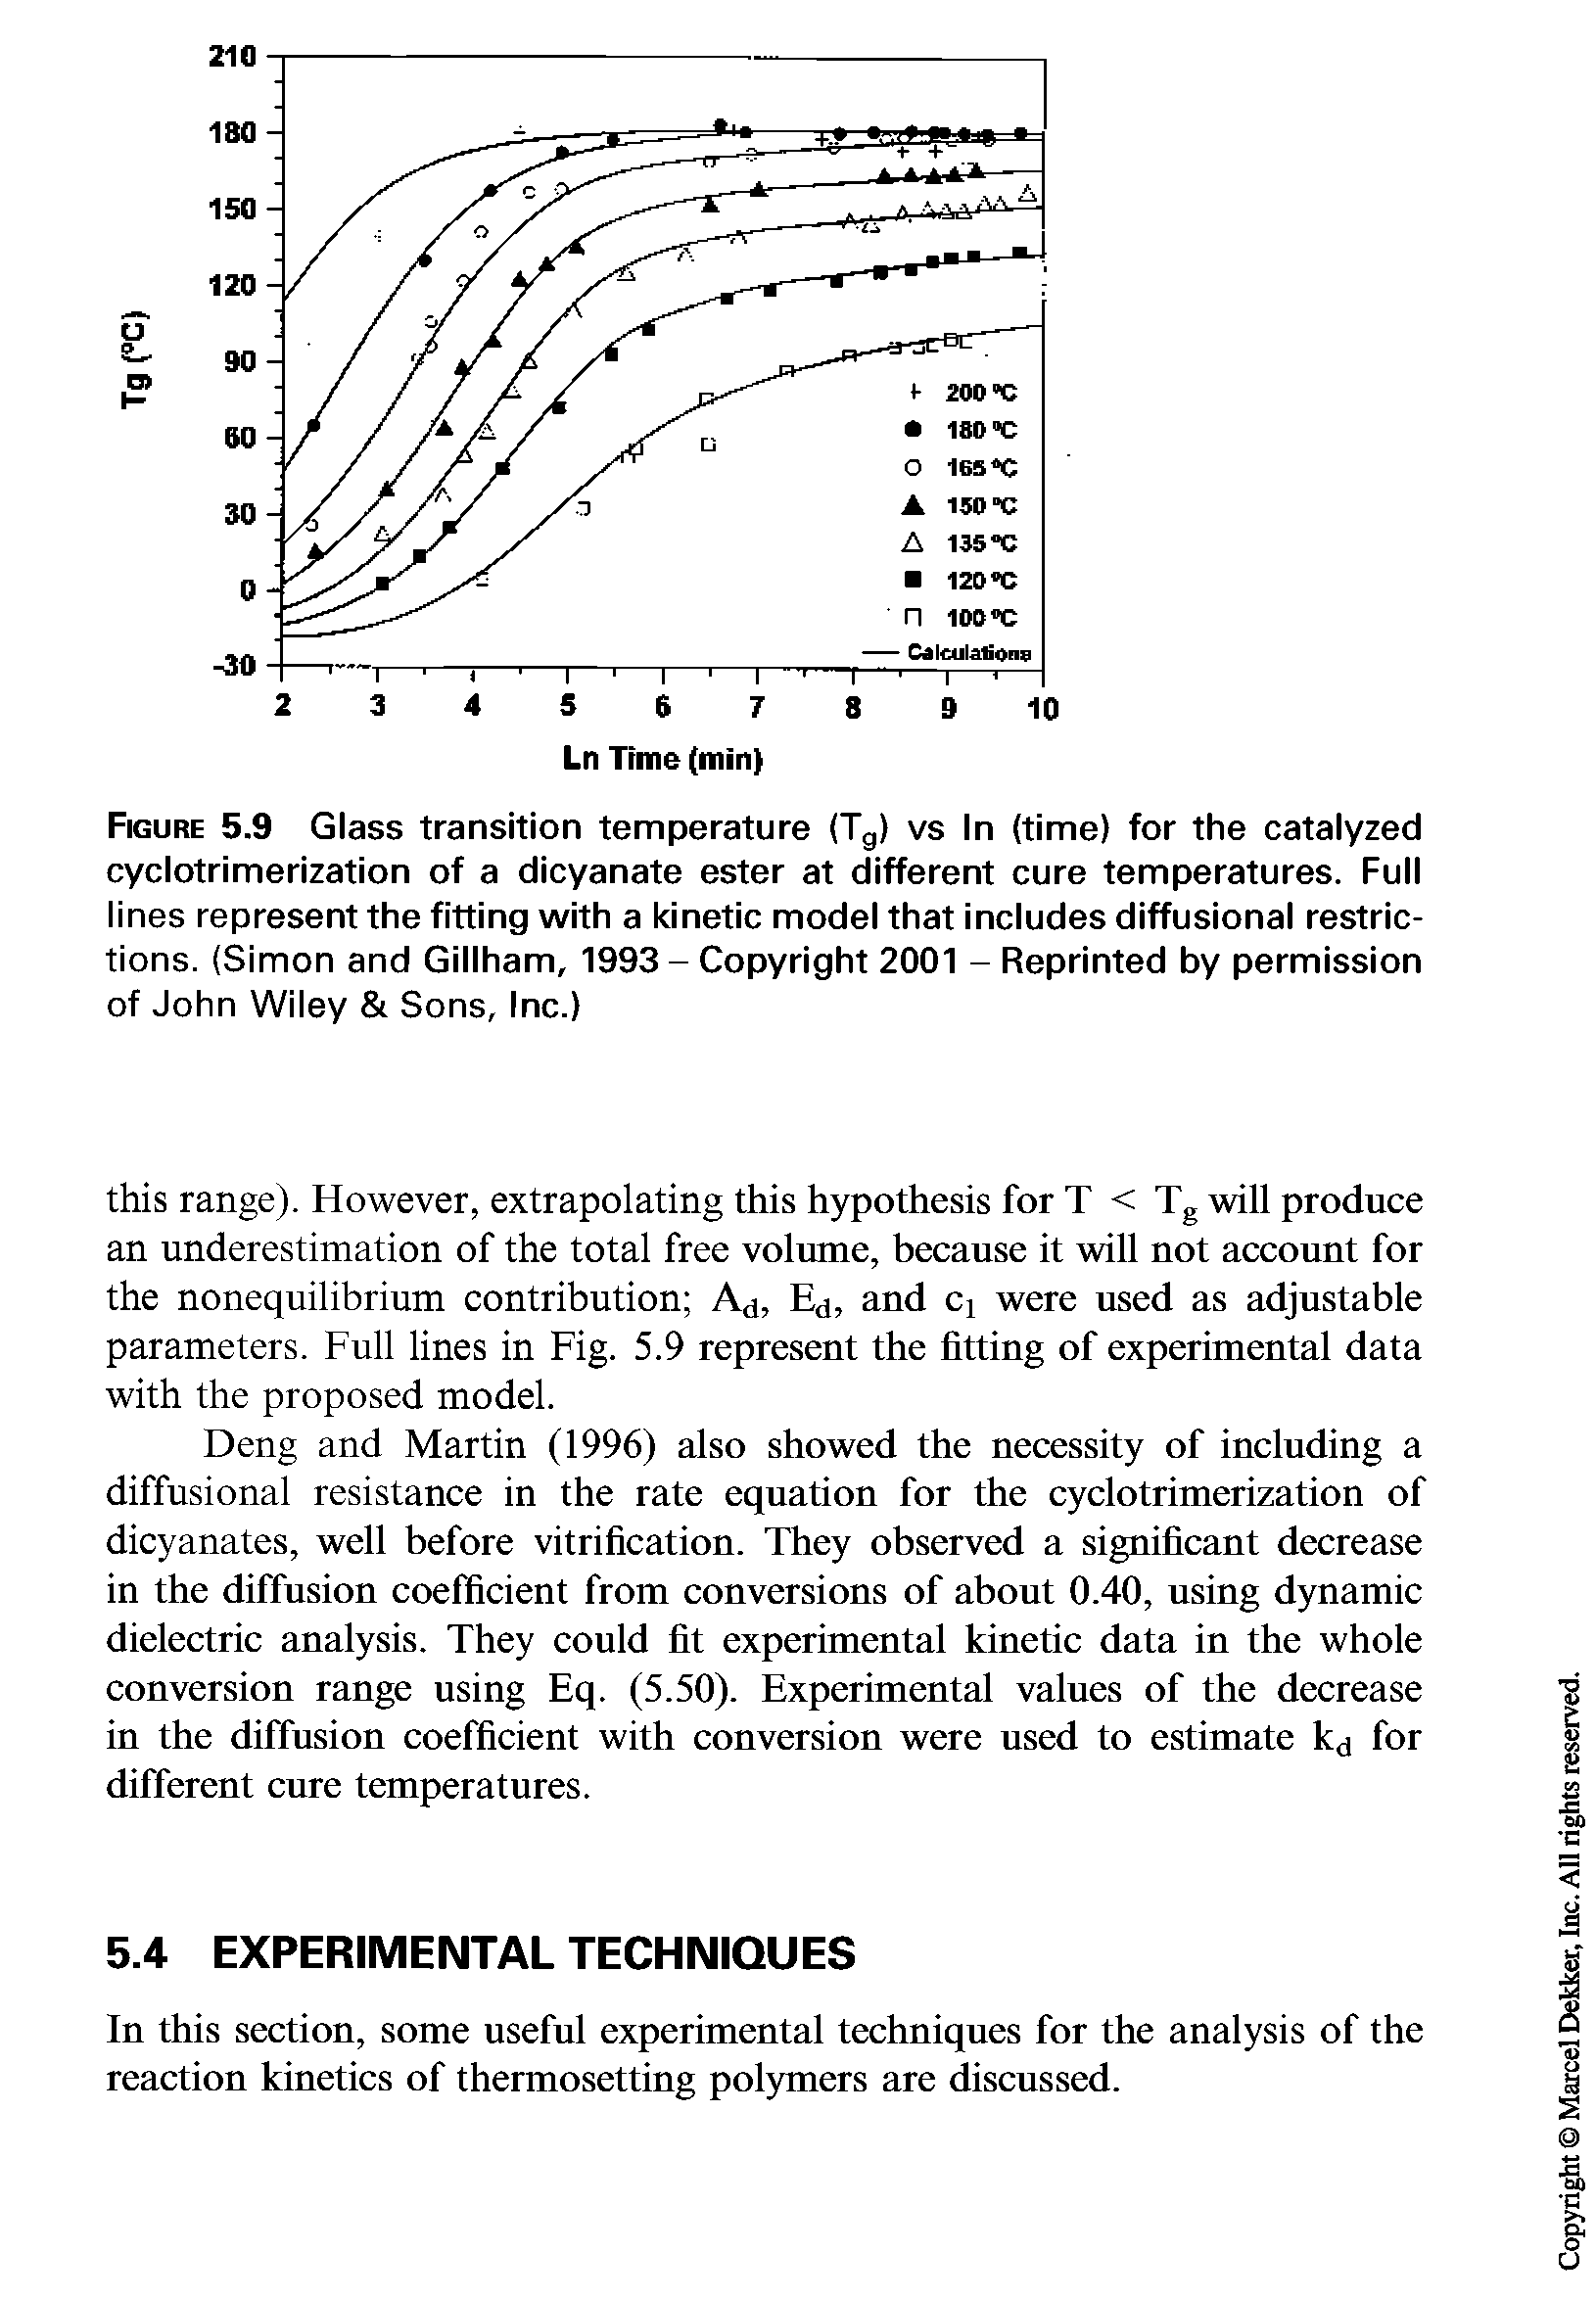 Figure 5.9 Glass transition temperature (Tg) vs In (time) for the catalyzed cyclotrimerization of a dicyanate ester at different cure temperatures. Full lines represent the fitting with a kinetic model that includes diffusional restrictions. (Simon and Gillham, 1993 - Copyright 2001 - Reprinted by permission of John Wiley Sons, Inc.)...